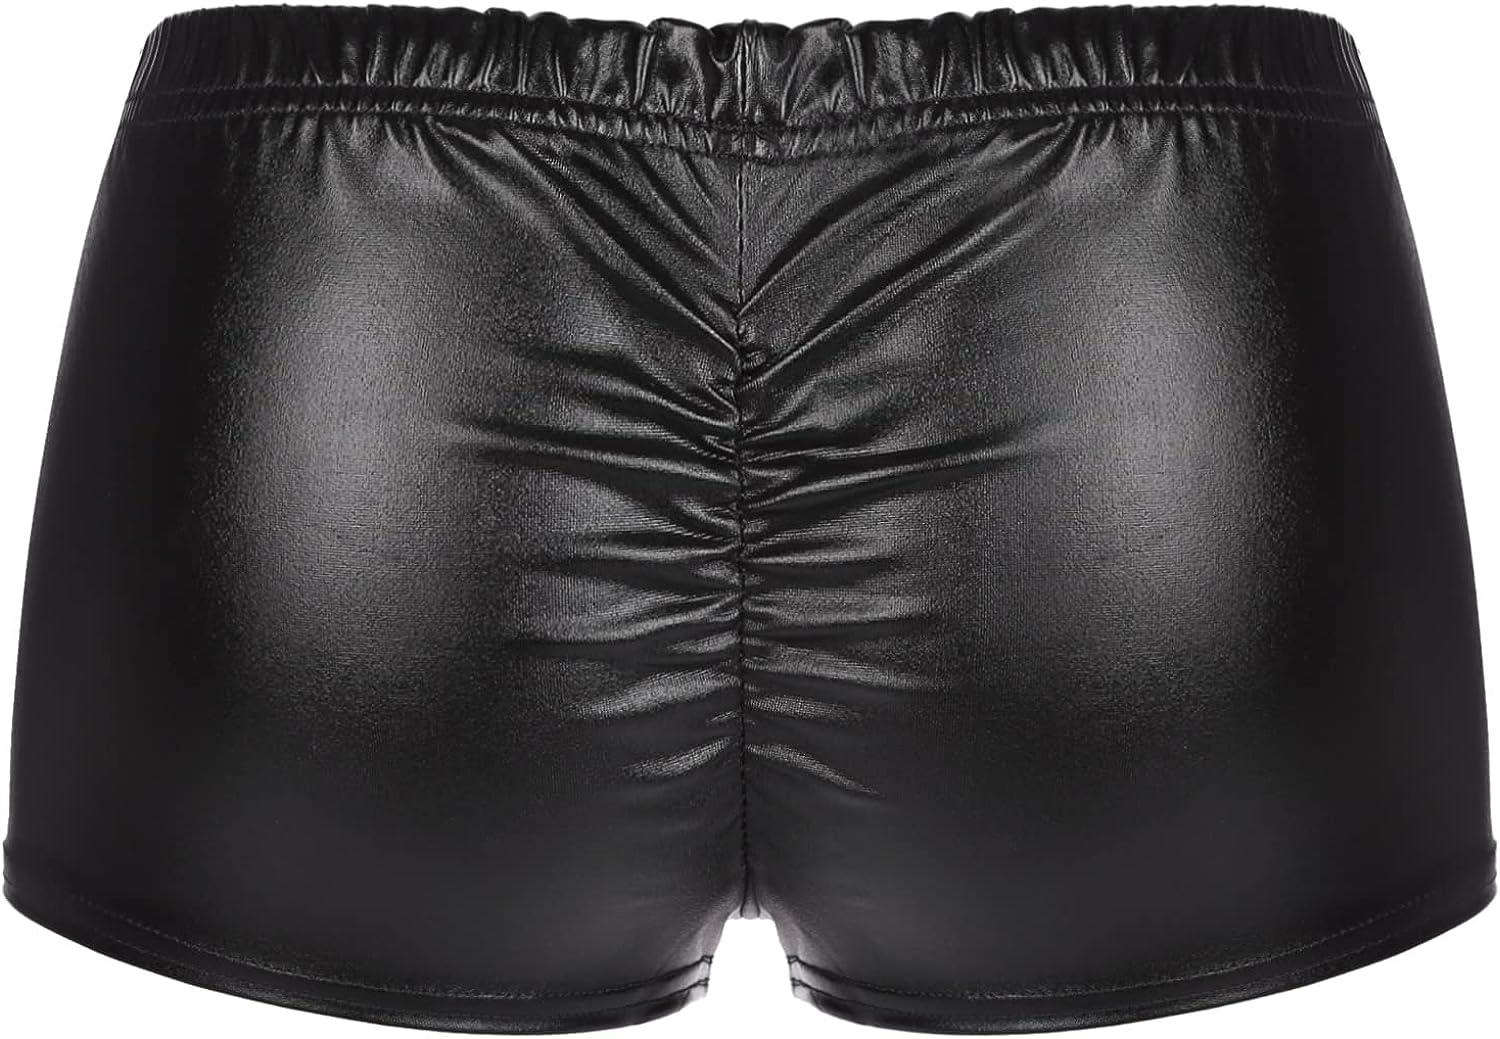 YONGHS Women's Low Waist Leather Look Solid Shorts Hot Pants